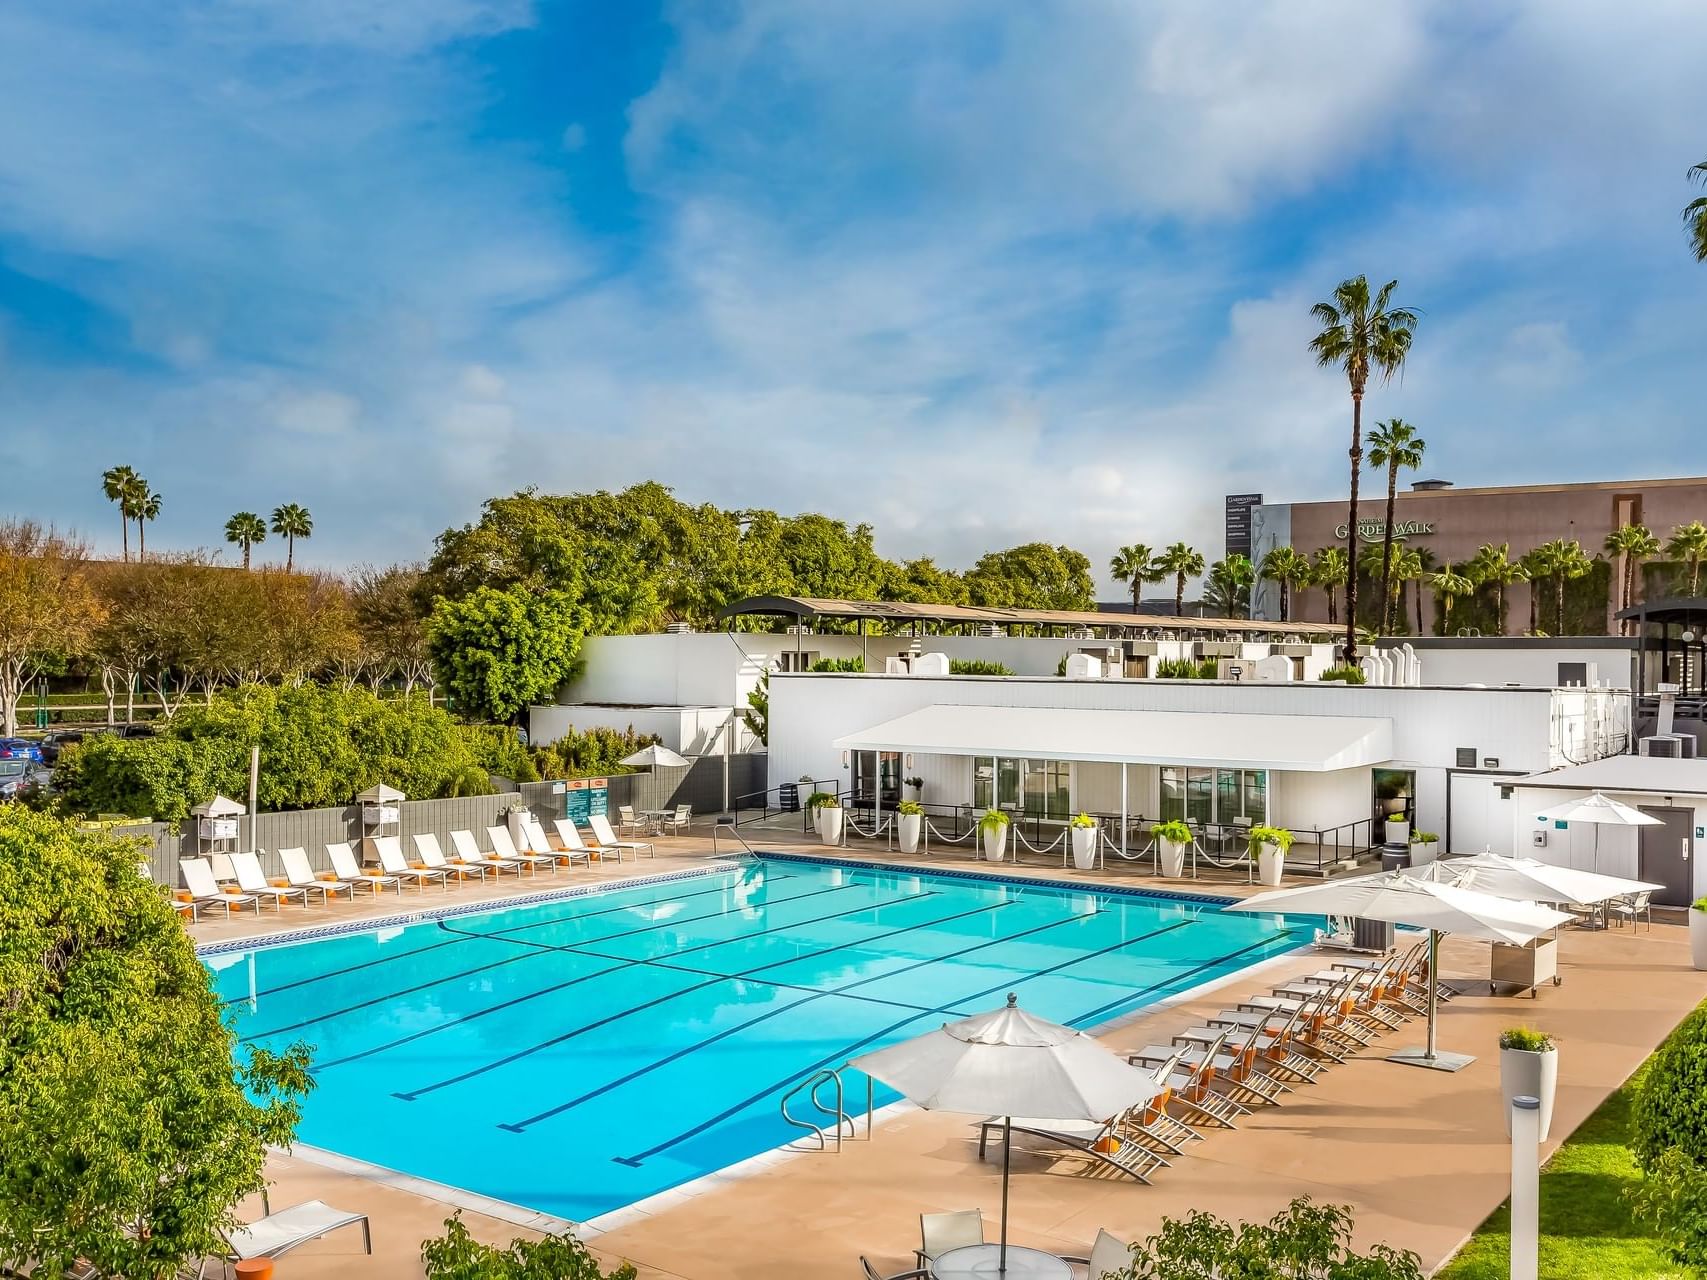 View of an outdoor pool & poolside dining area at Anaheim Hotel